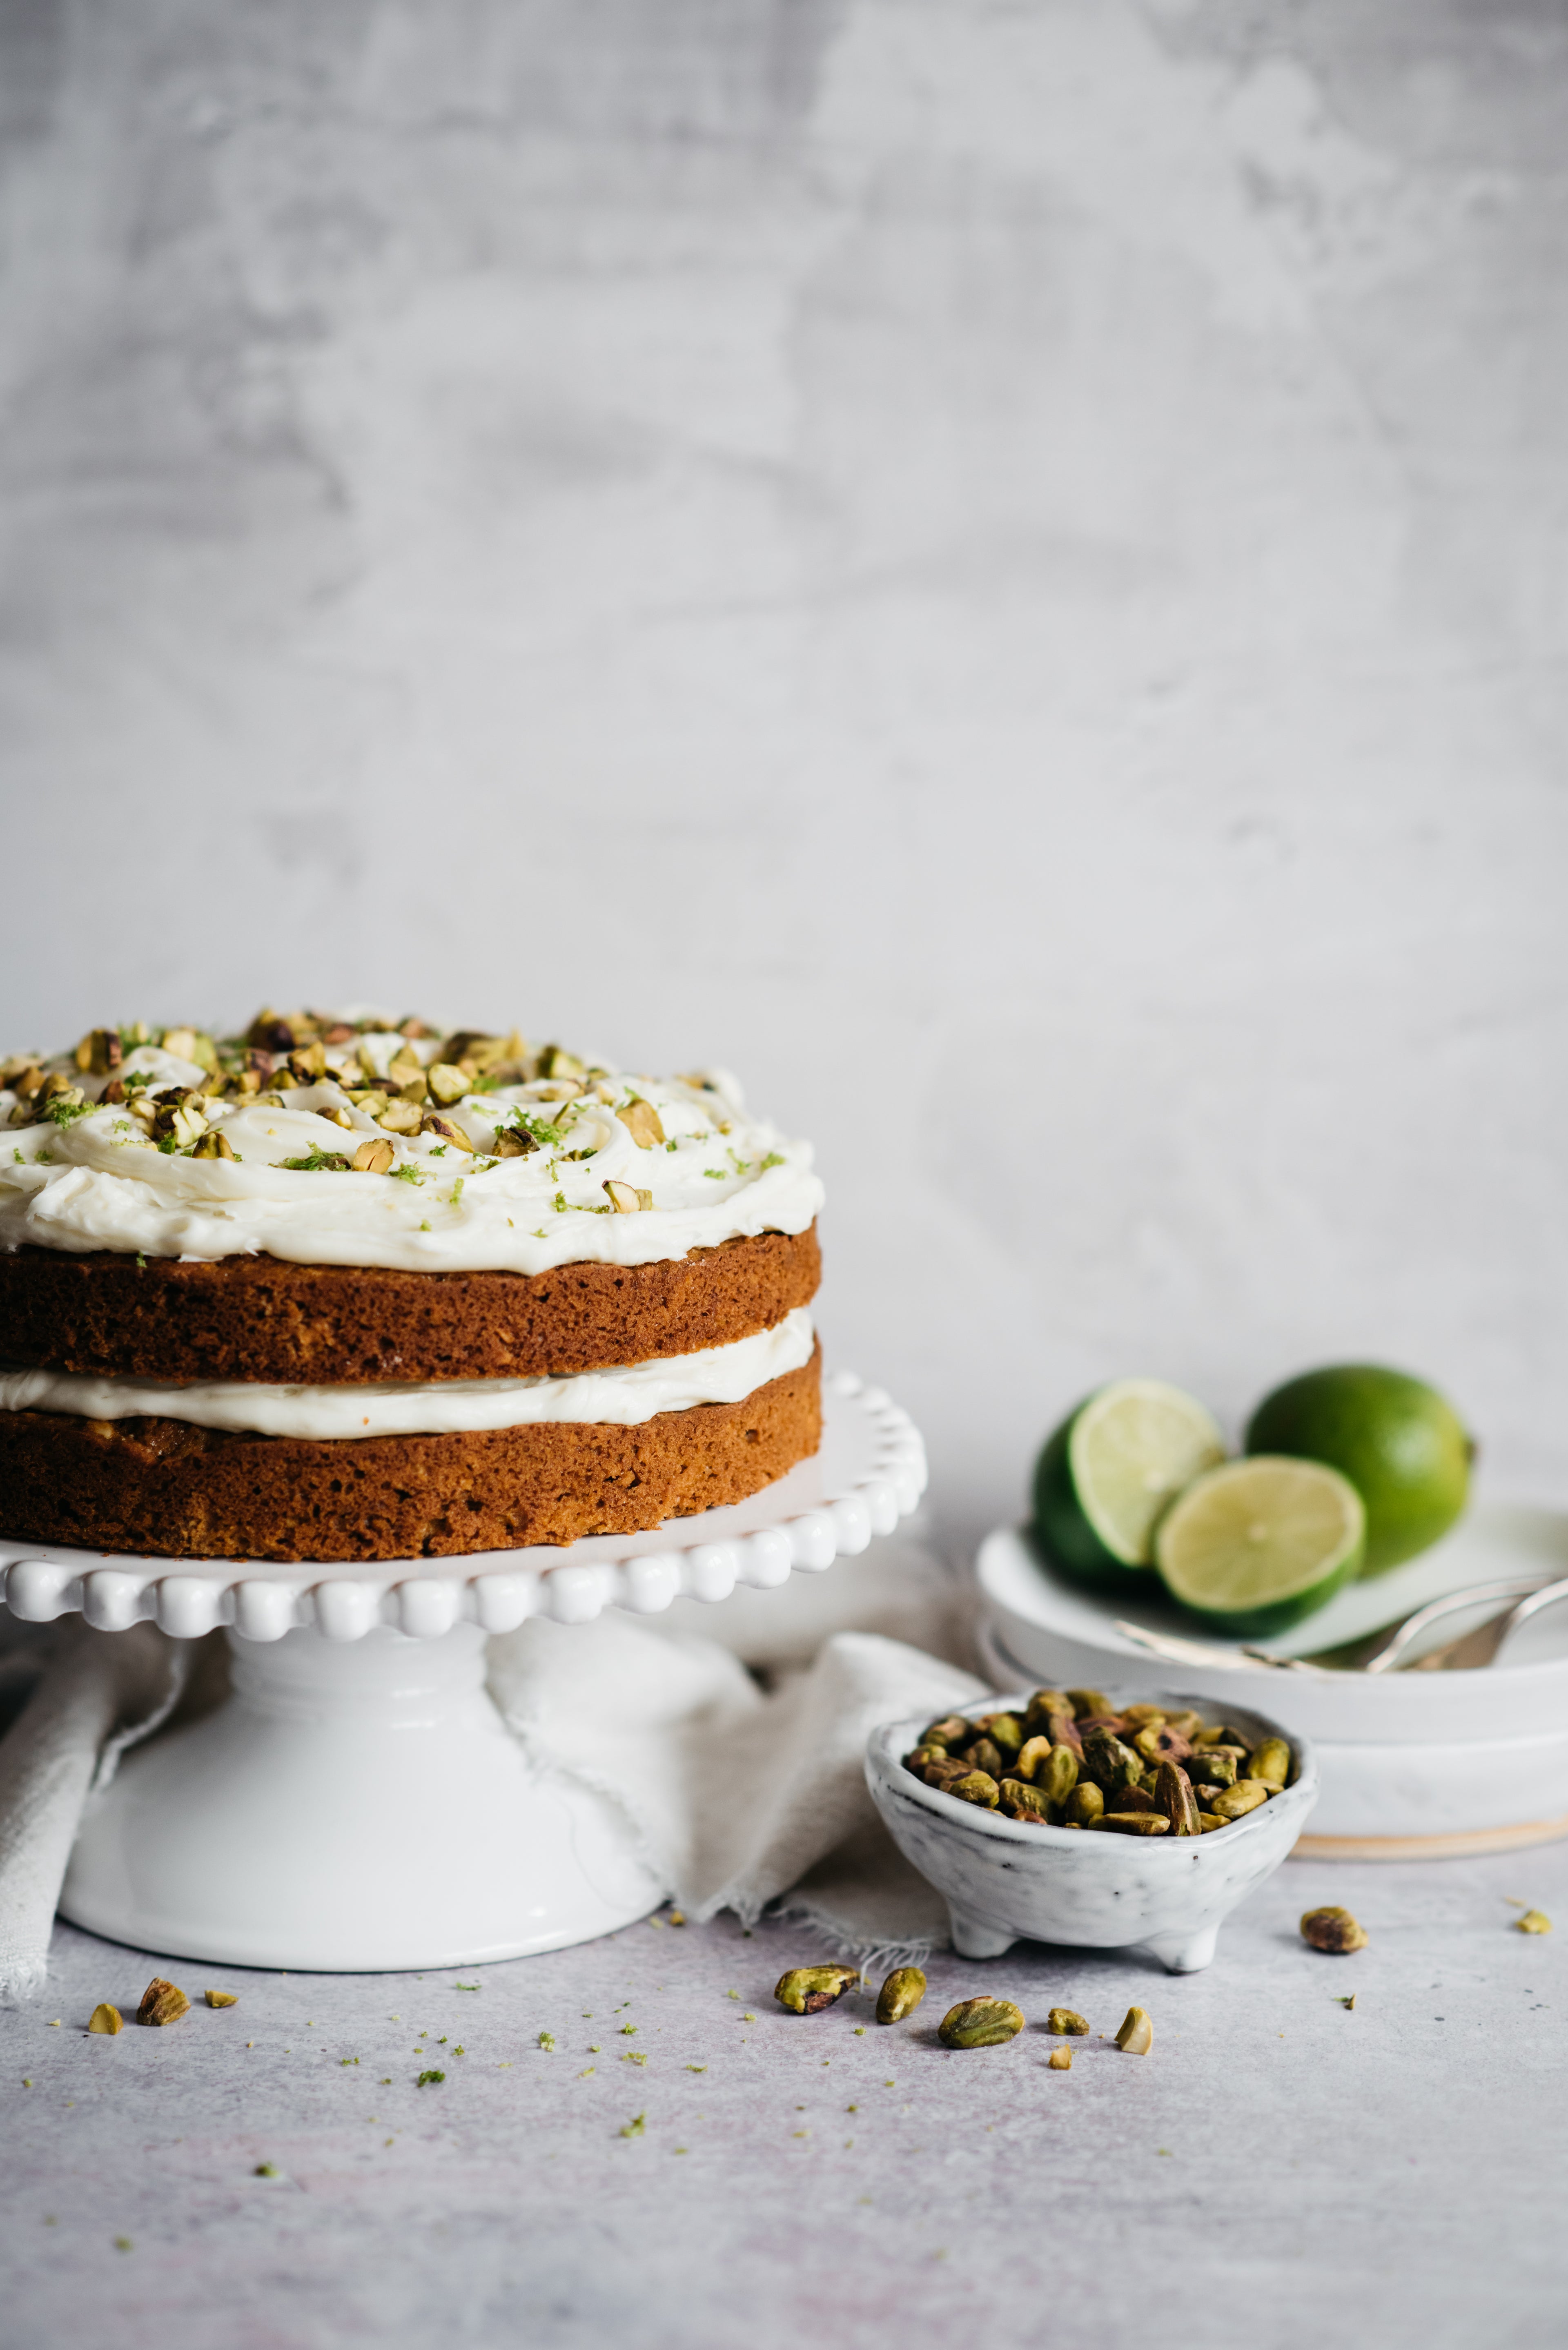 Carrot cake with icing on cake stand. Bowl of pistachios and limes in foreground